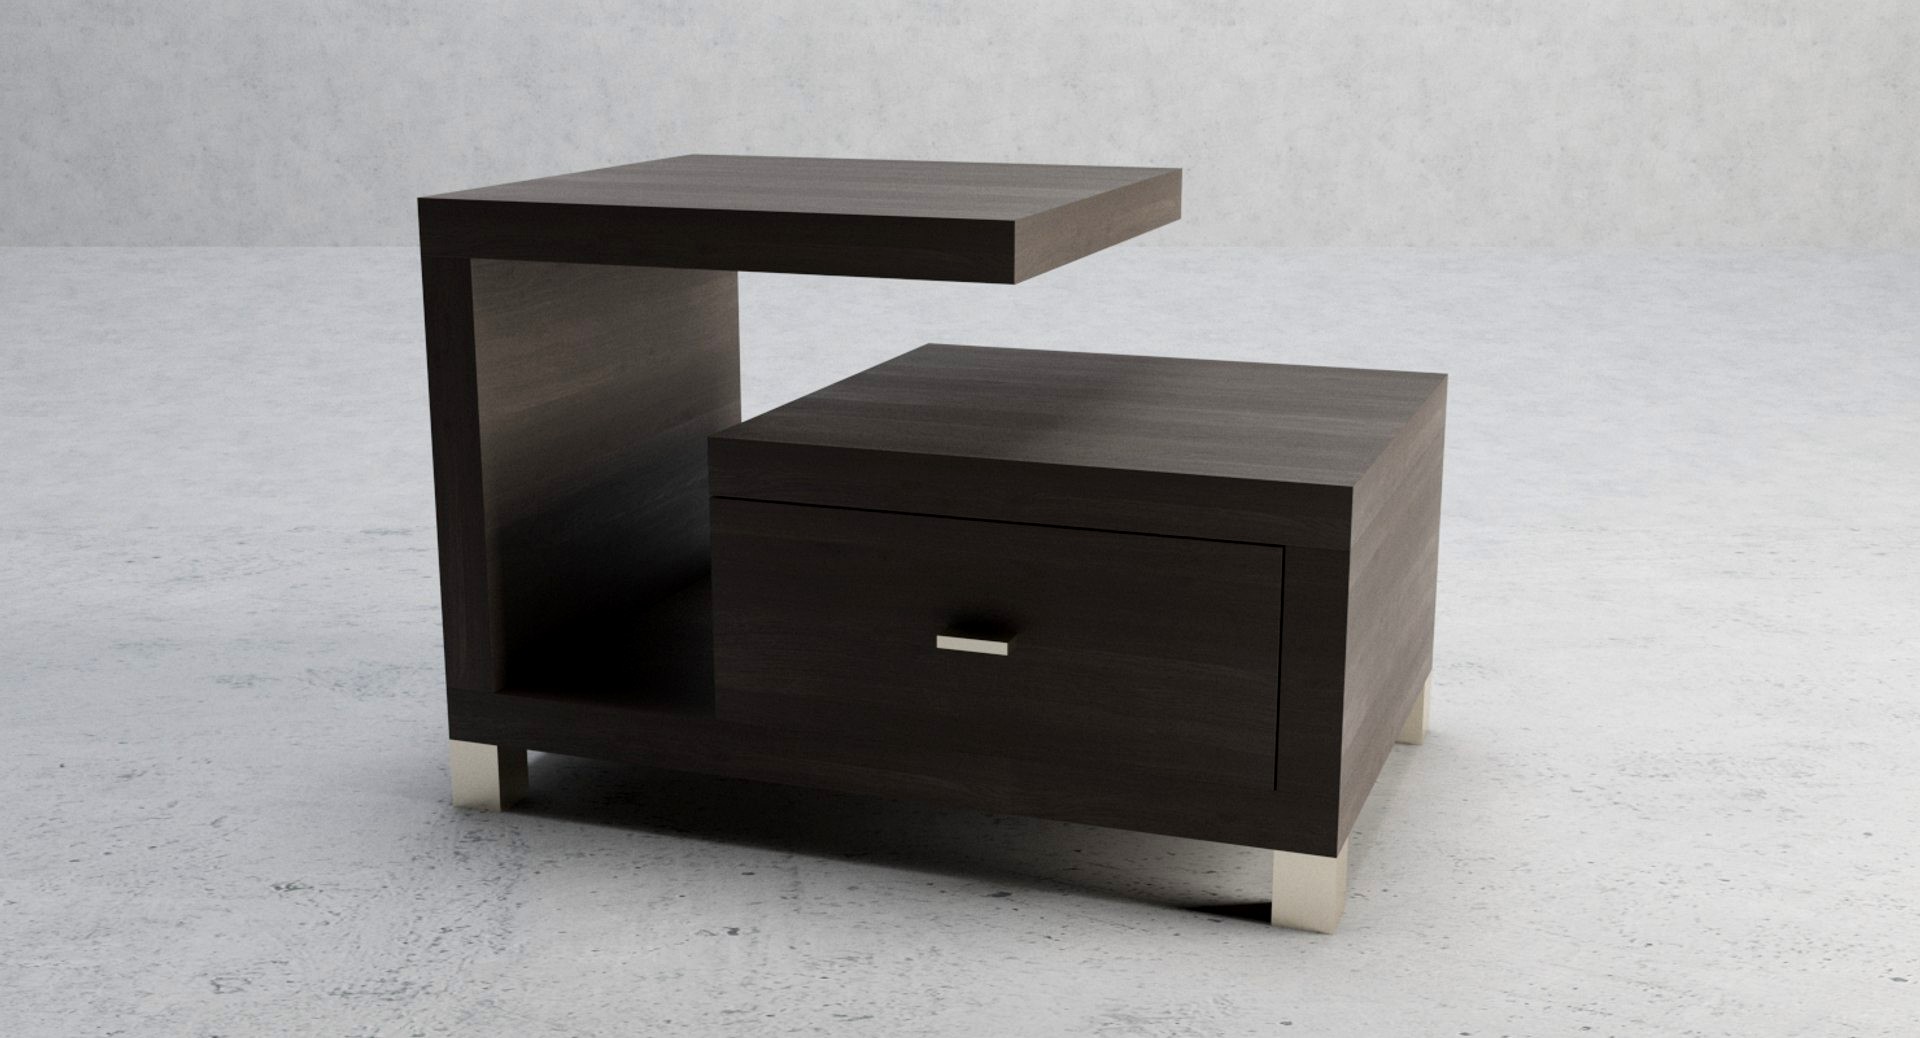 Cantilever Night Stand